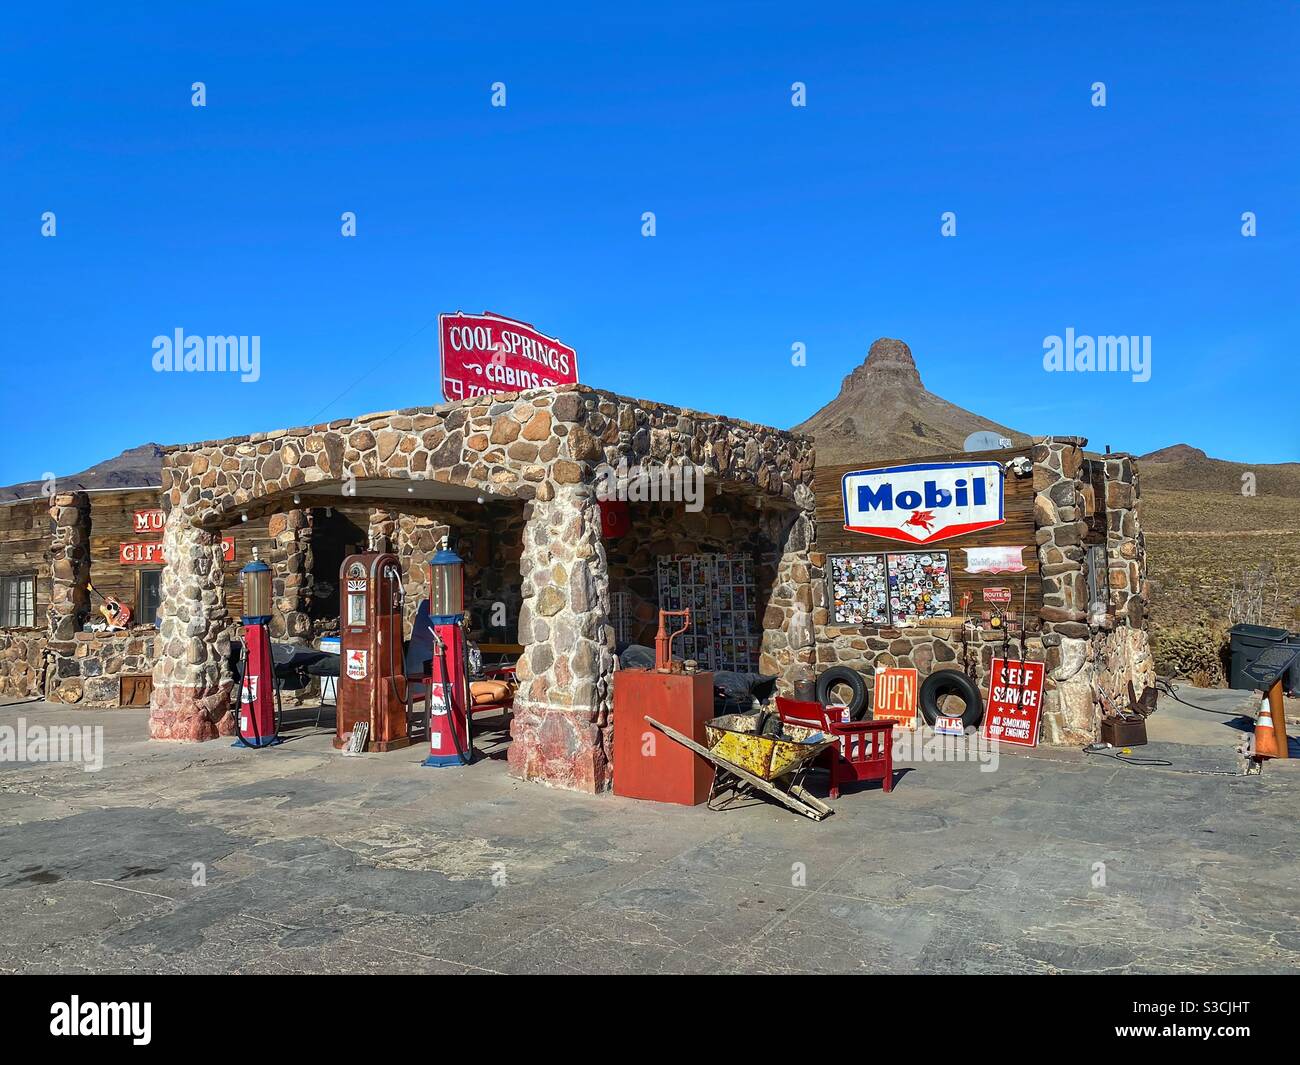 Cool Springs gas station in Arizona along Route 66. This town was the inspiration for the town Radiator Springs in the movie Cars. Stock Photo